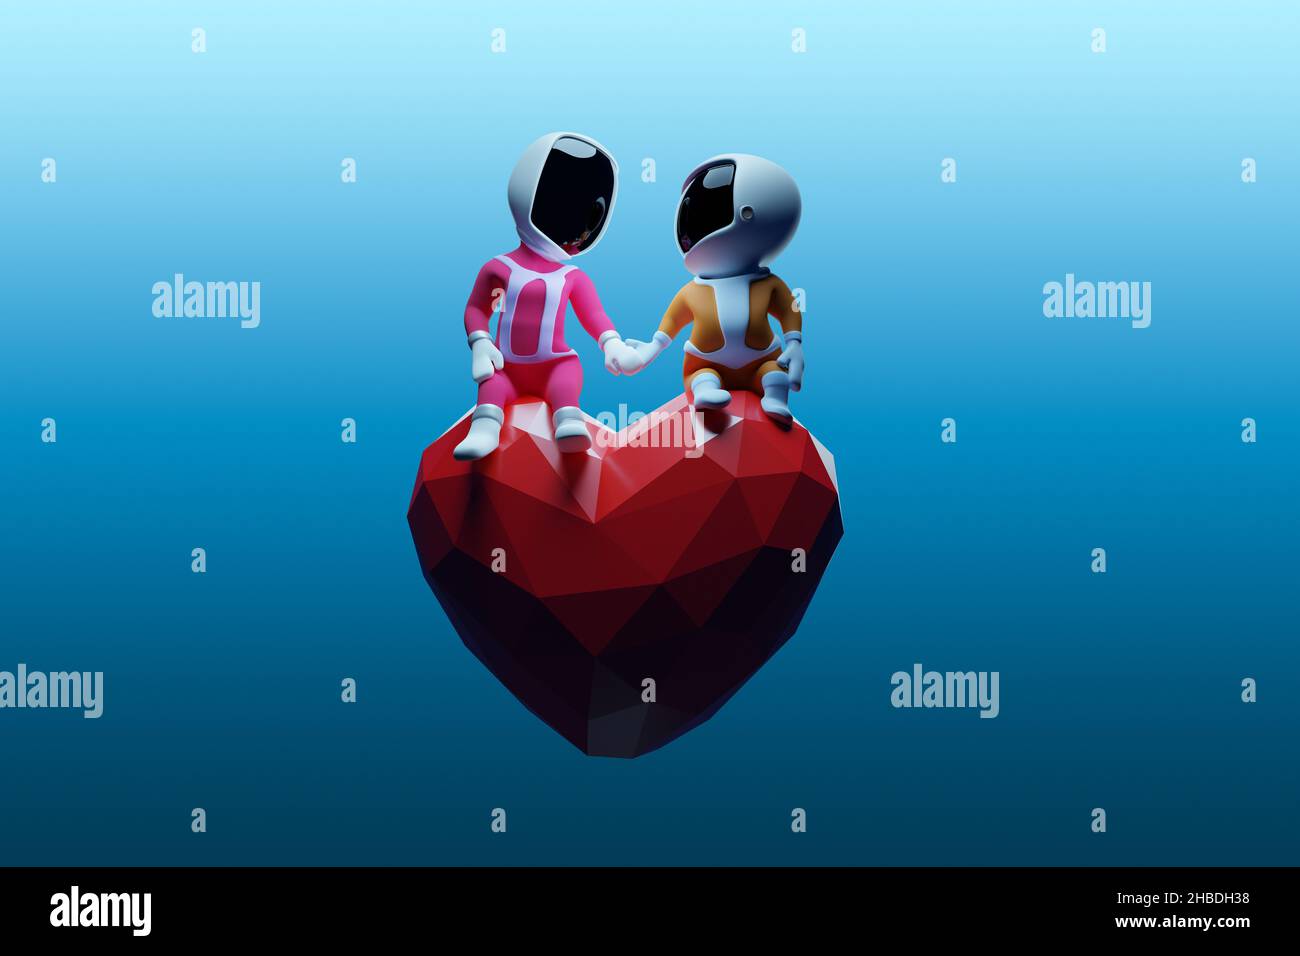 Spaceboy and spacegirl holding hands while sitting on a heart. Valentine's day, man and woman in love, relationship. 3D rendering. Stock Photo